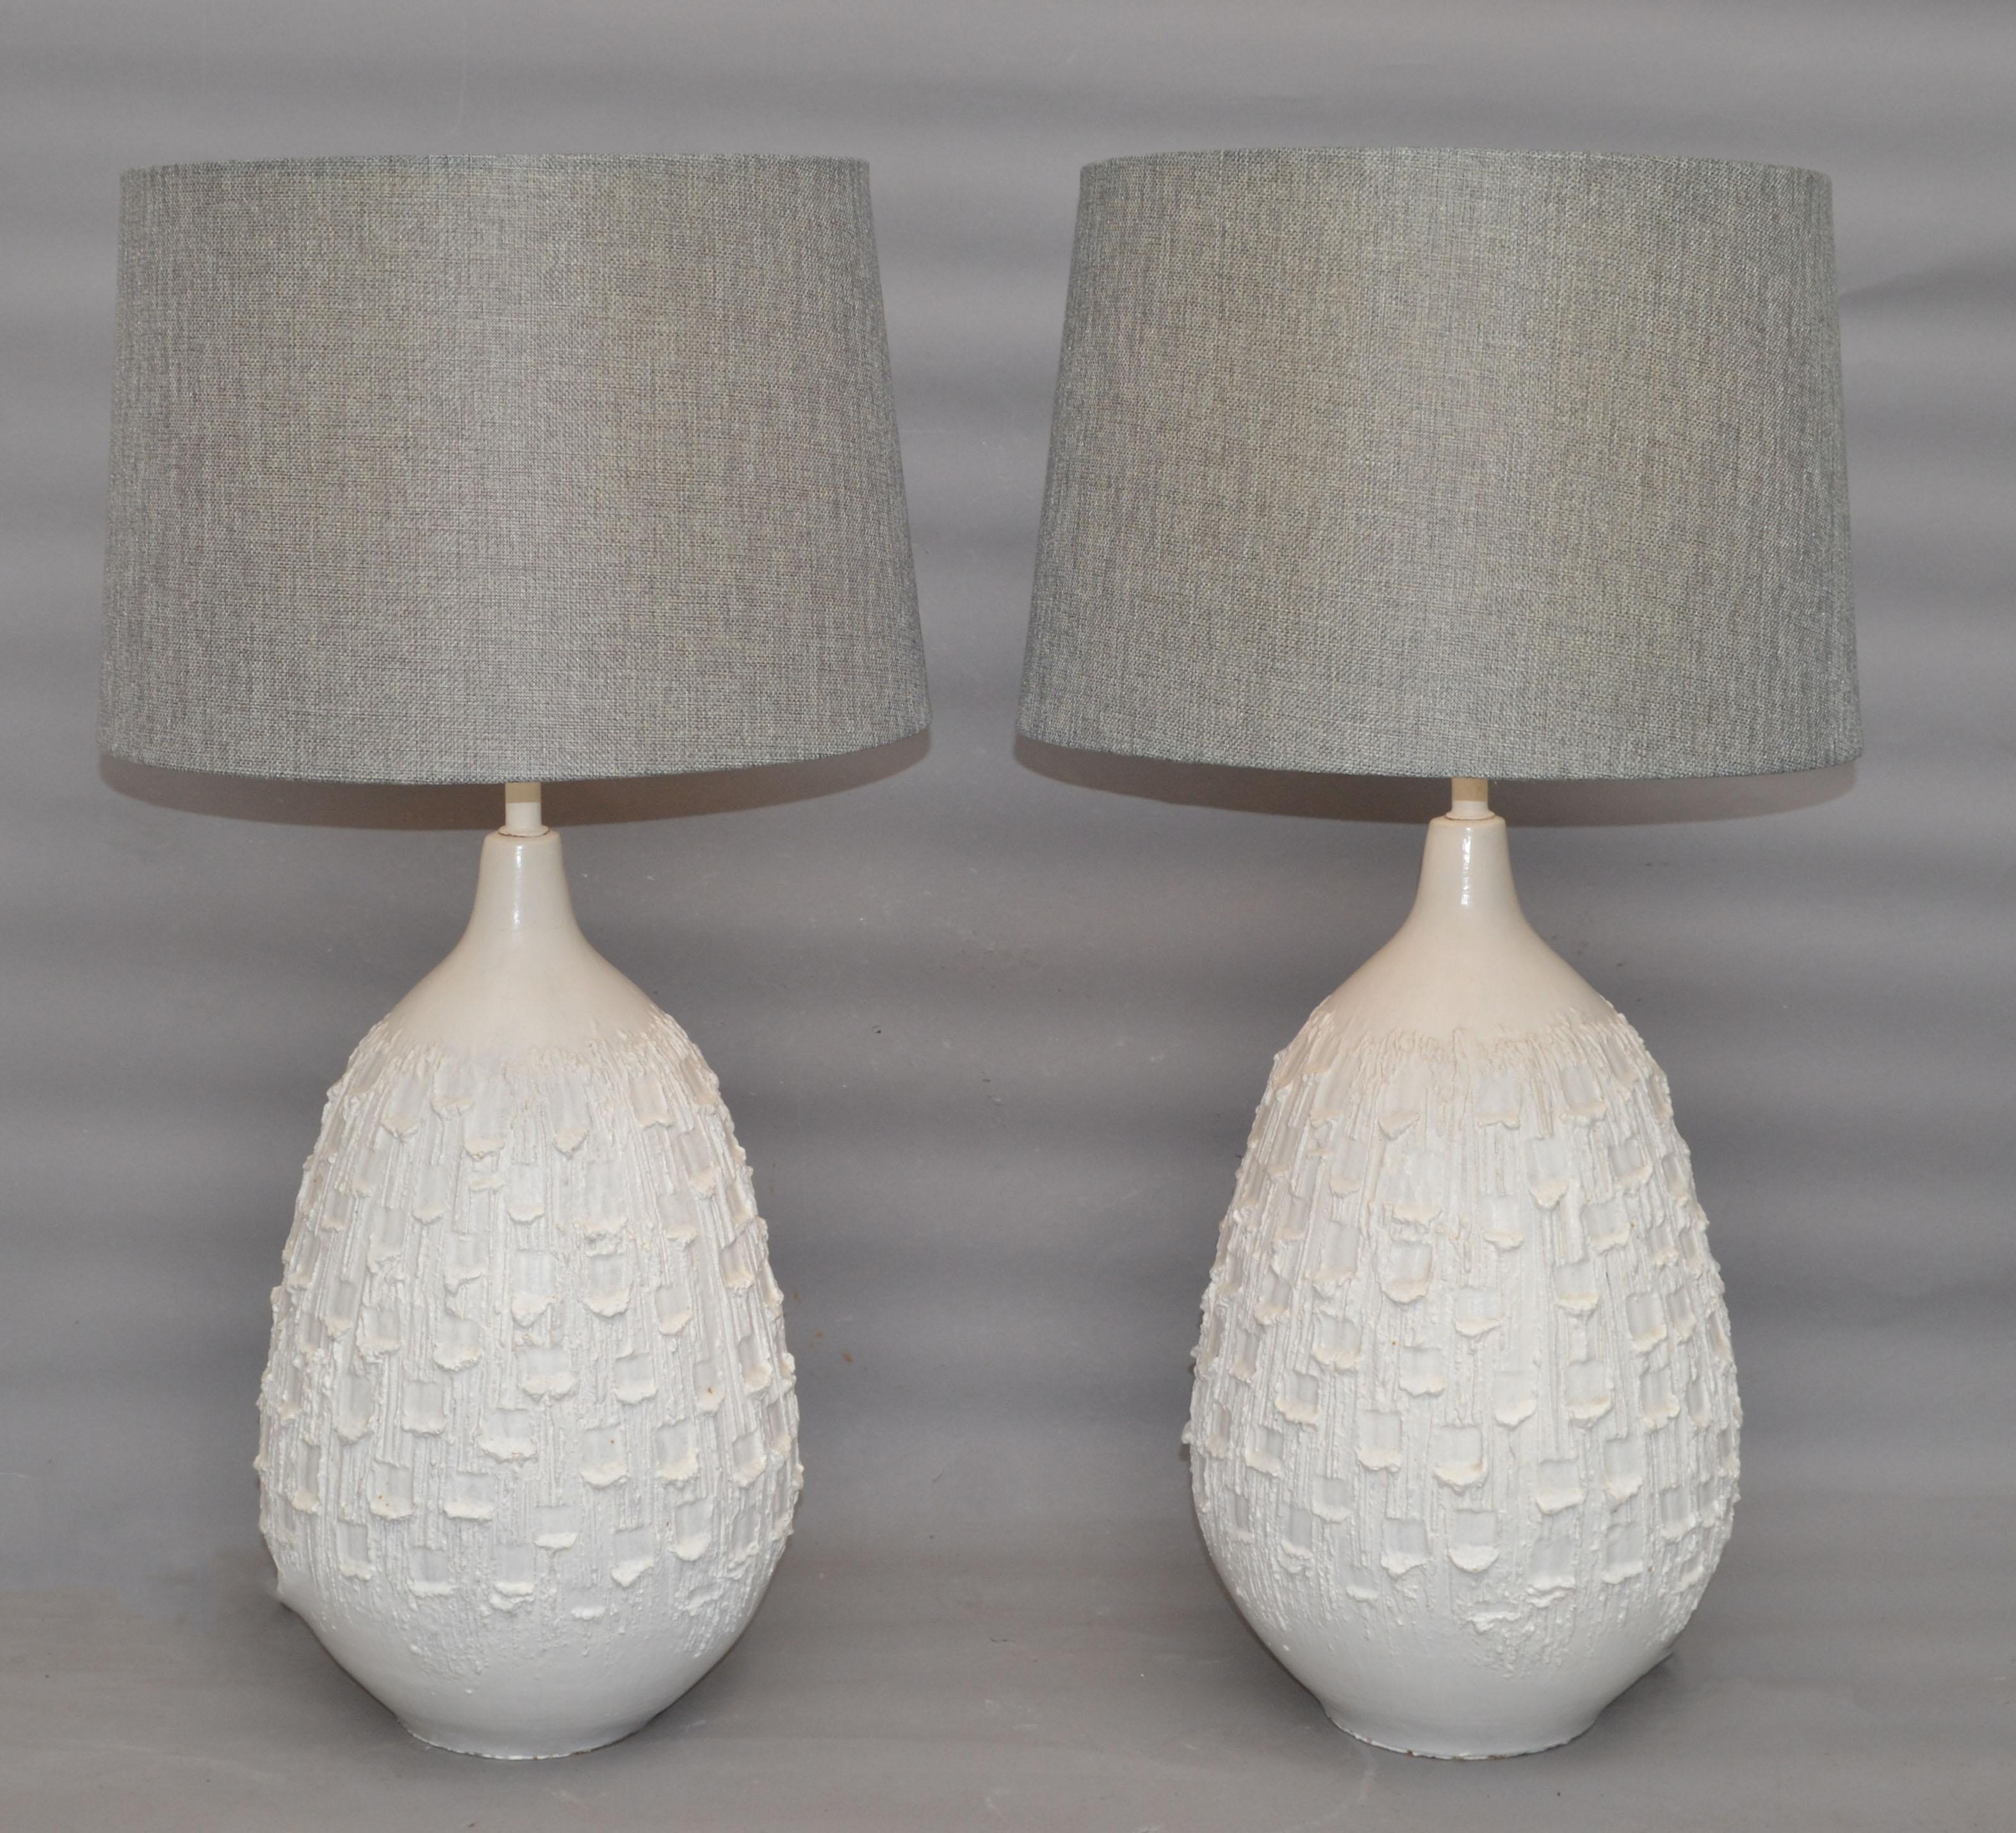 Pair of Mid-Century Modern White Ceramic Table Lamps For Sale 8